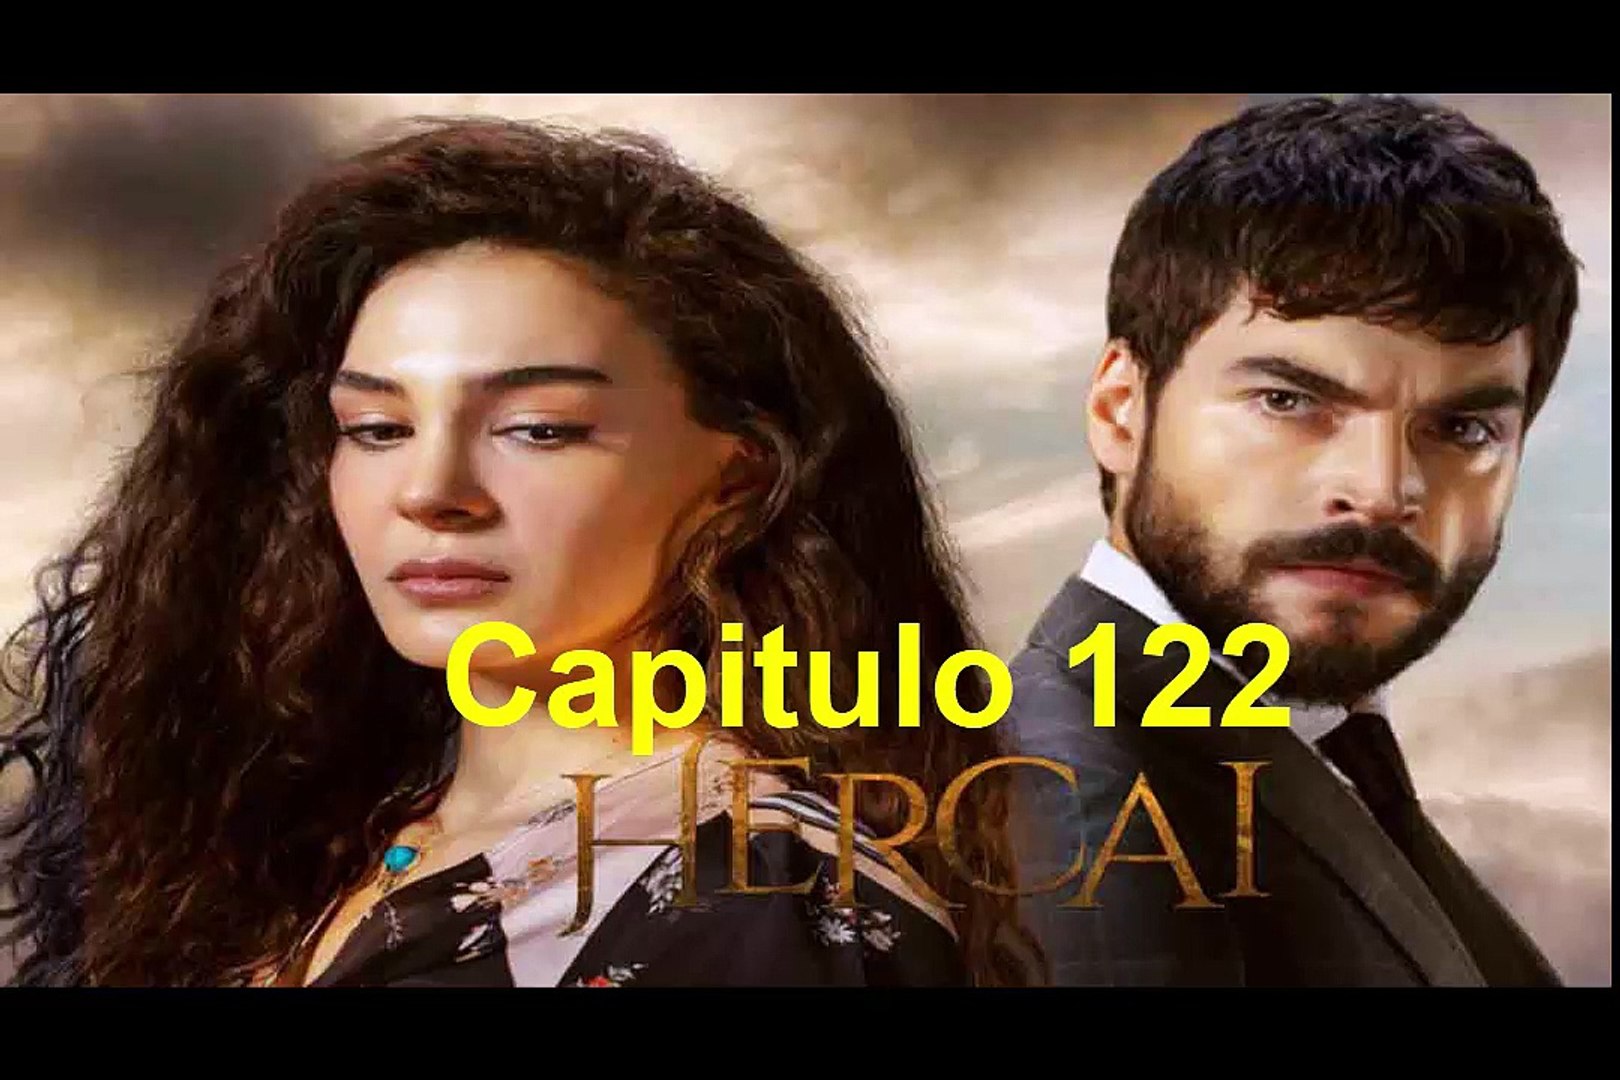 Hercai capitulo 122 Completo - Vídeo Dailymotion